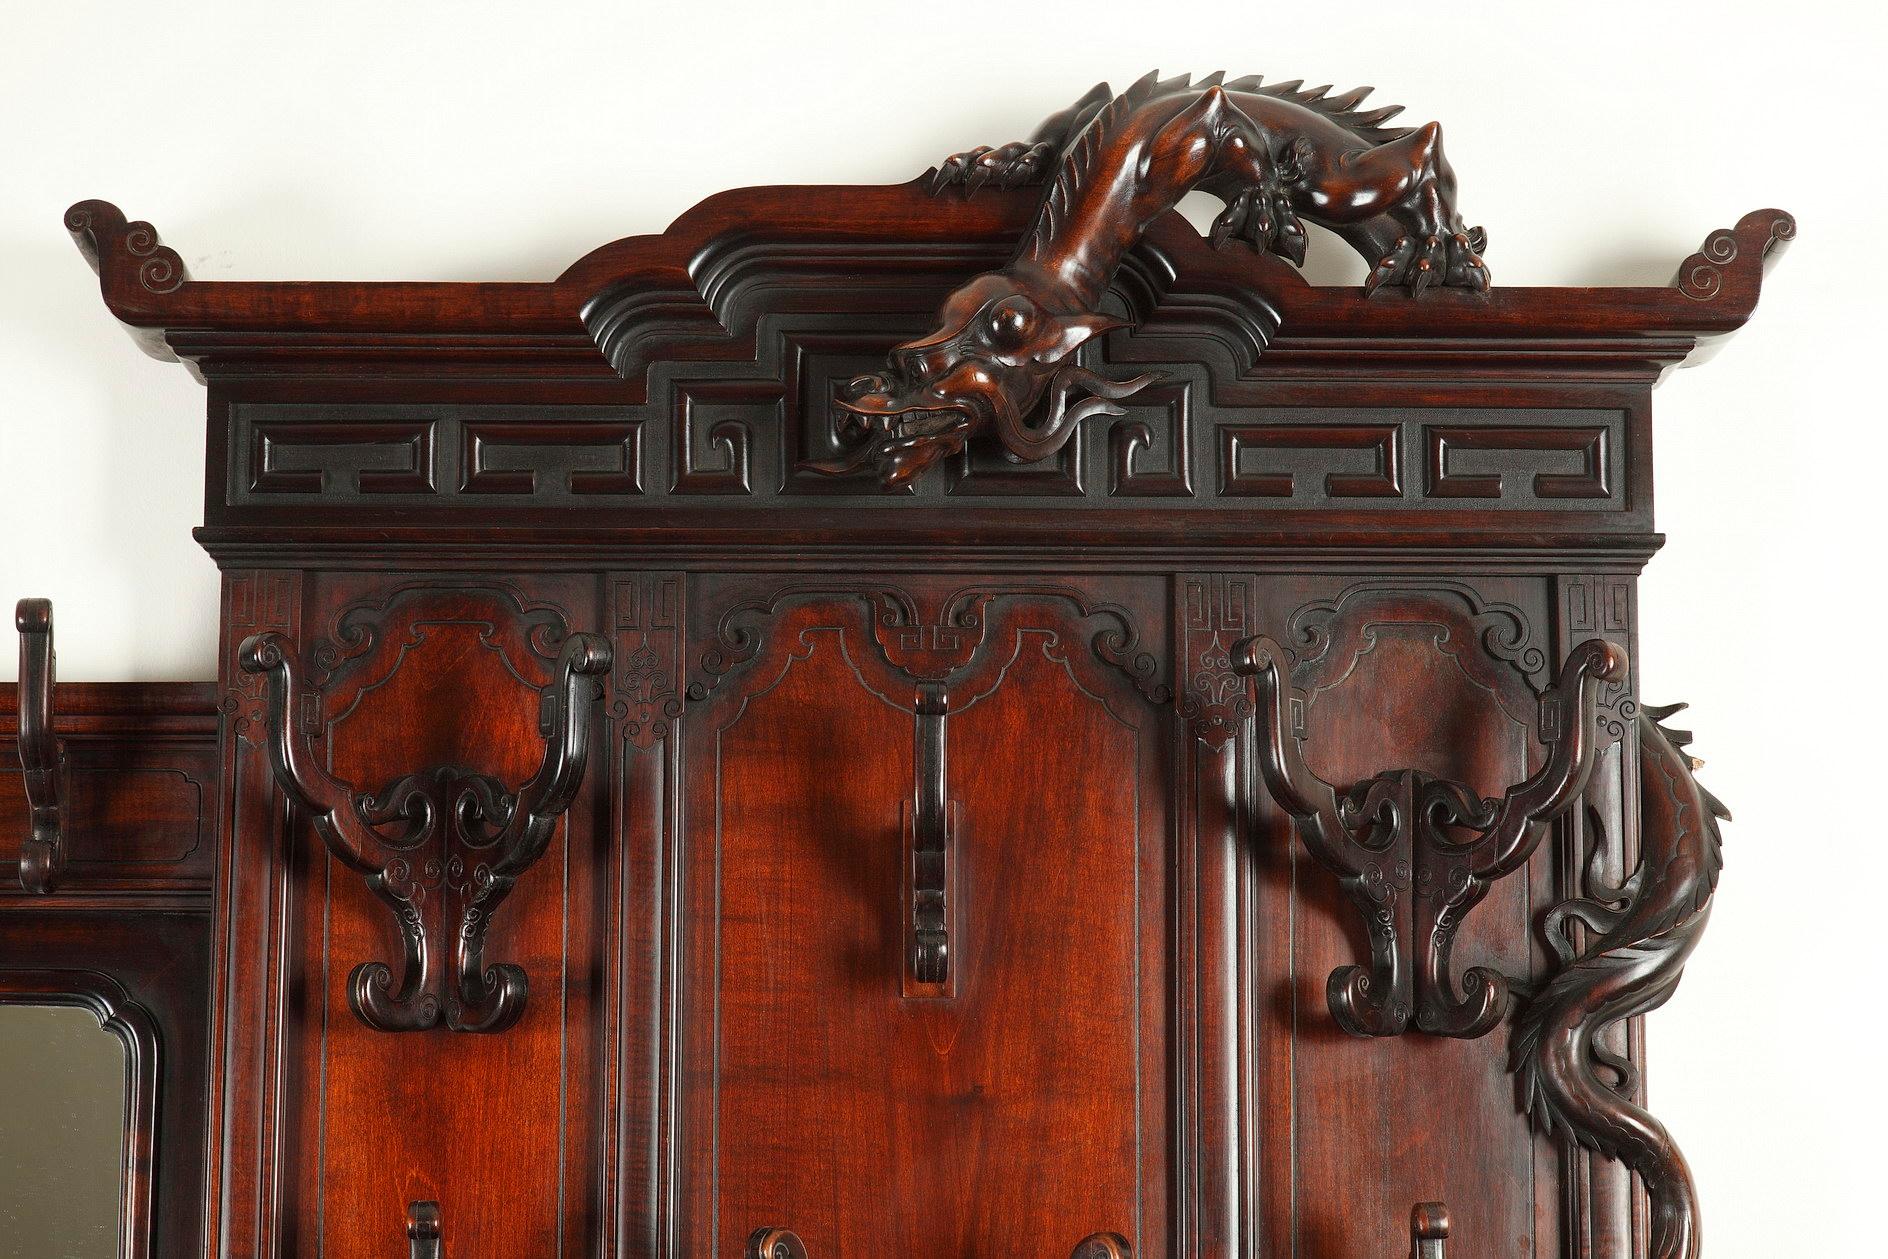 French Japanese Style Carved Wood Coat Hanger by G. Viardot, France, Circa 1880